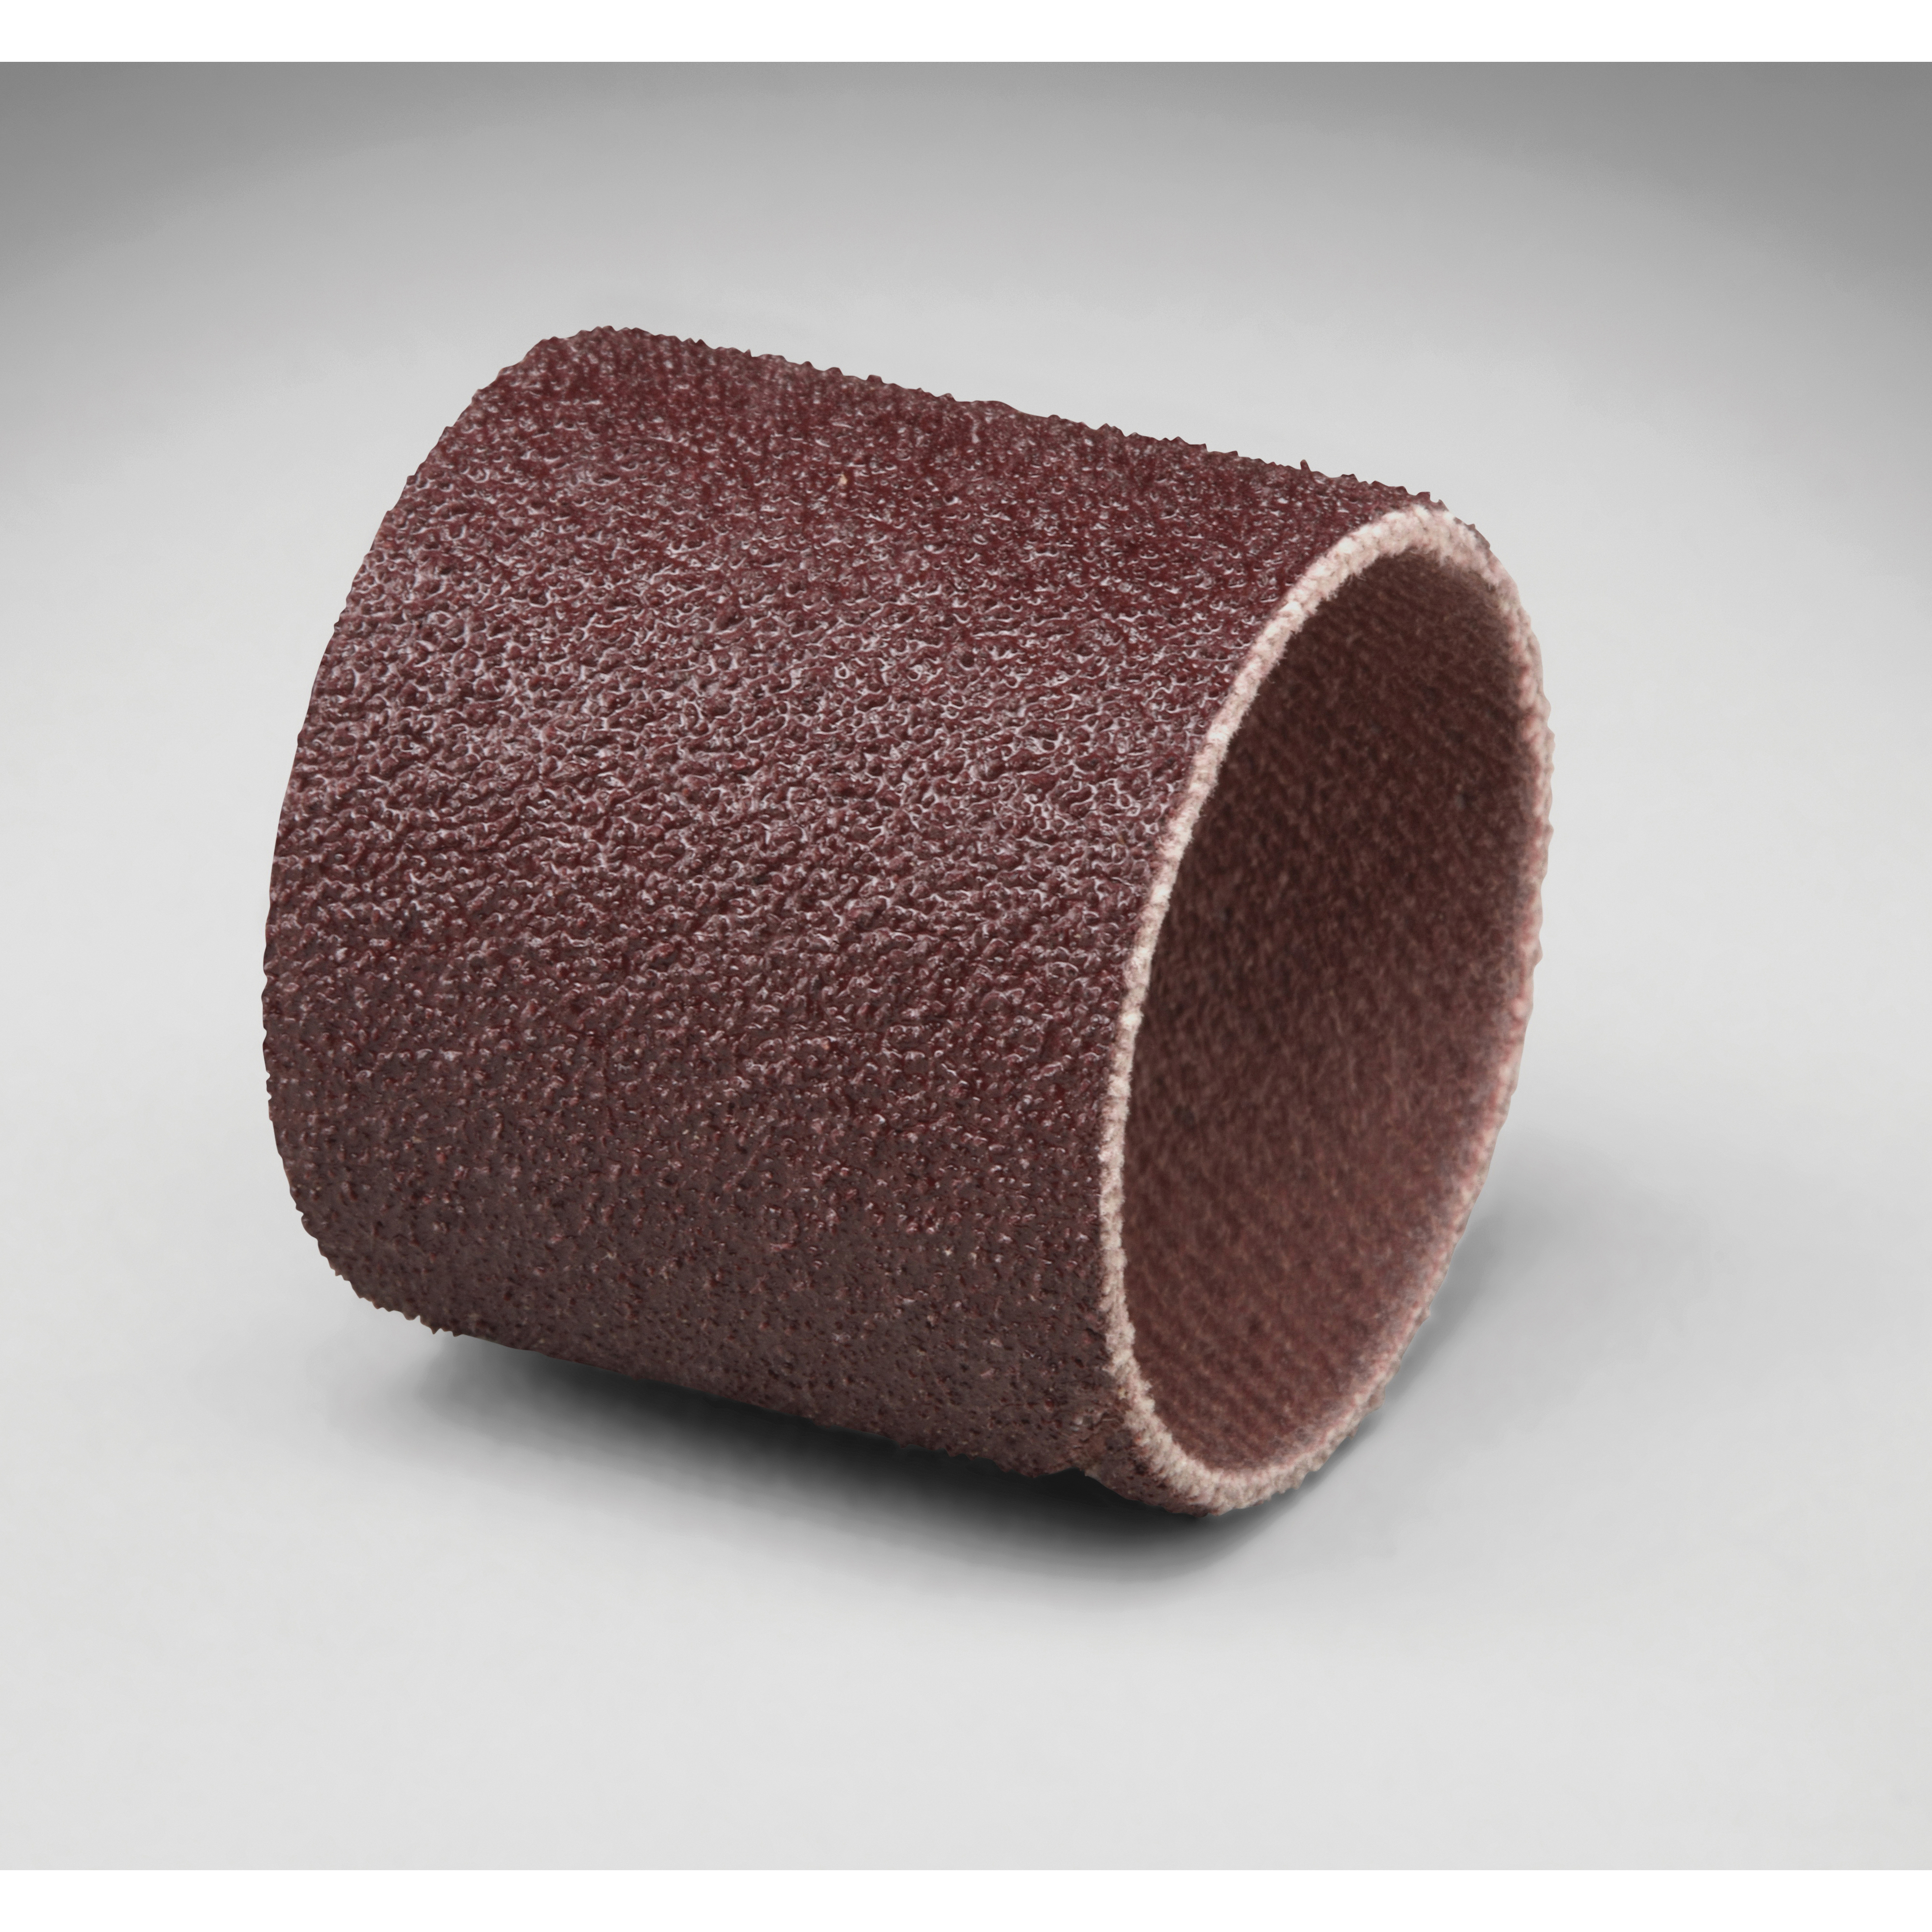 3M™ 051144-40212 341D Coated Band, 1 in Dia x 1 in L Band, 50 Grit, Coarse Grade, Aluminum Oxide Abrasive